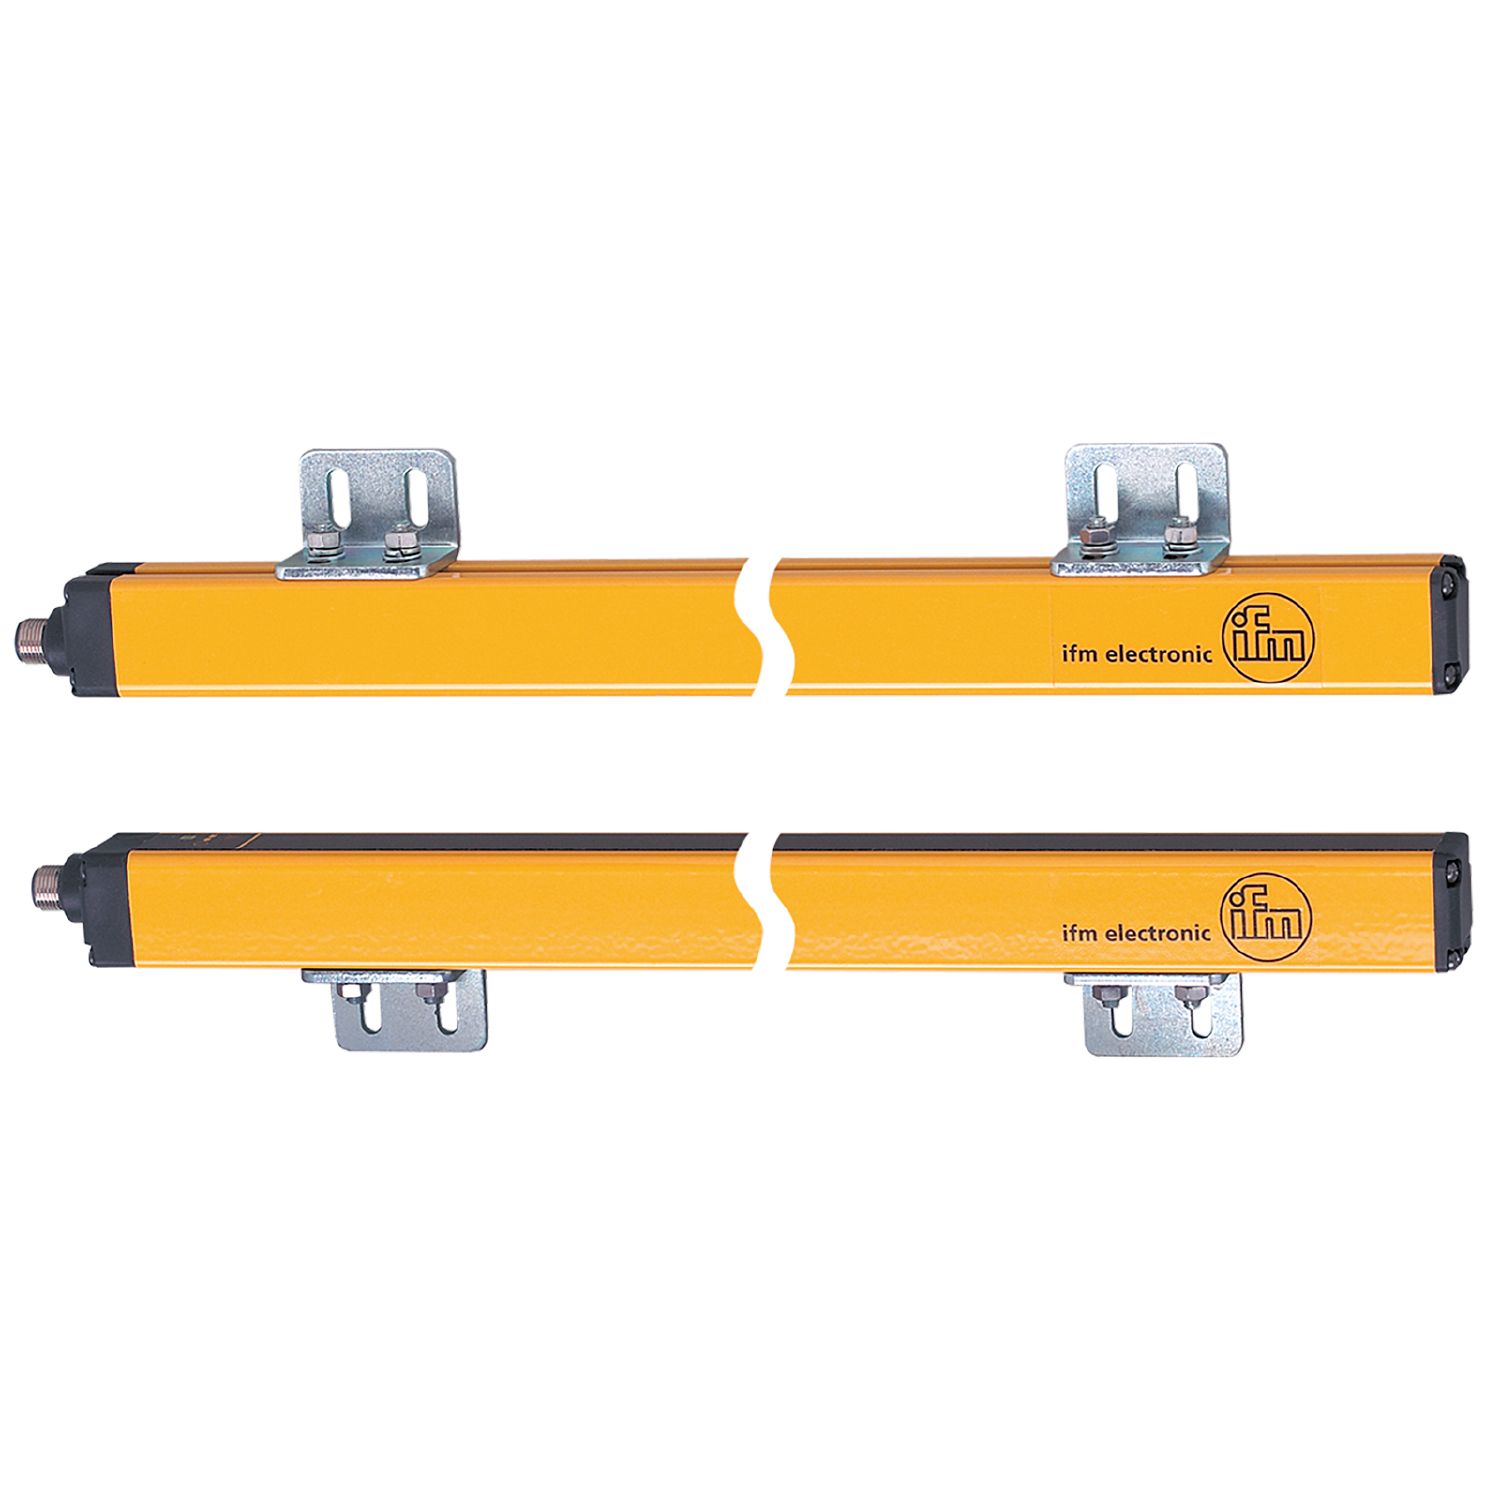 OY006S - Safety light curtain - ifm